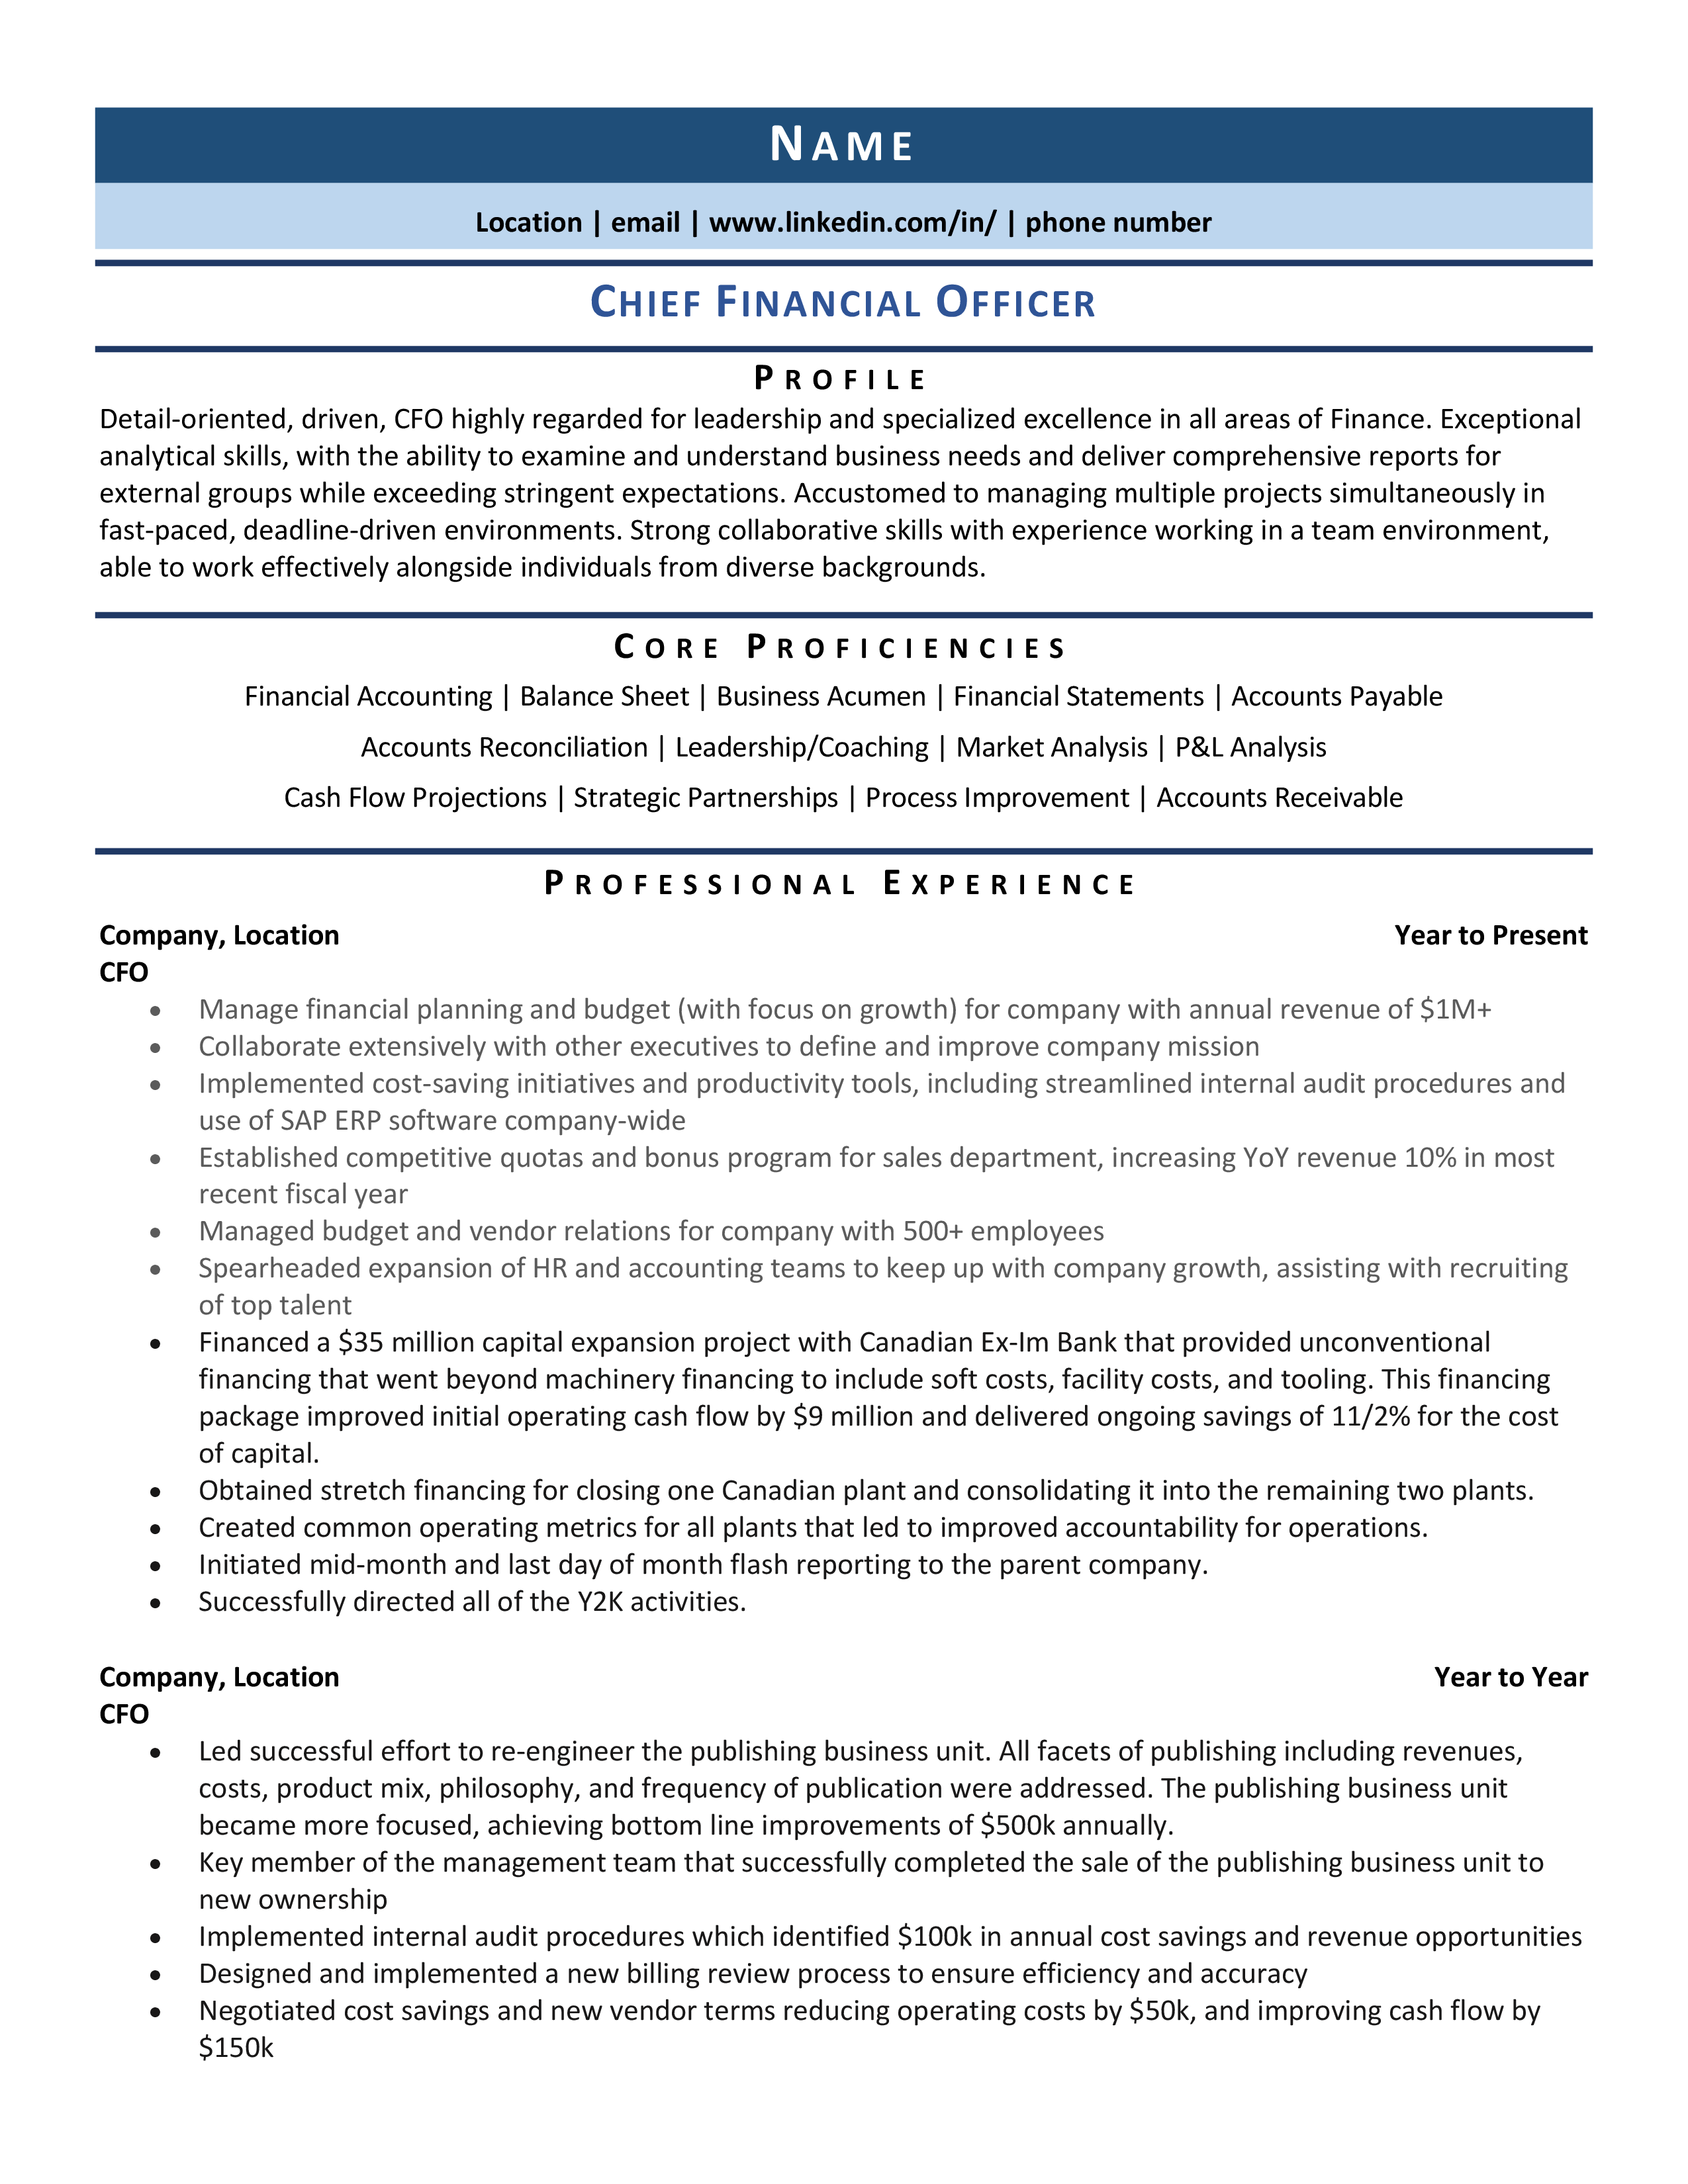 Chief Financial Officer (CFO) Resume Example Template for 2021 ZipJob